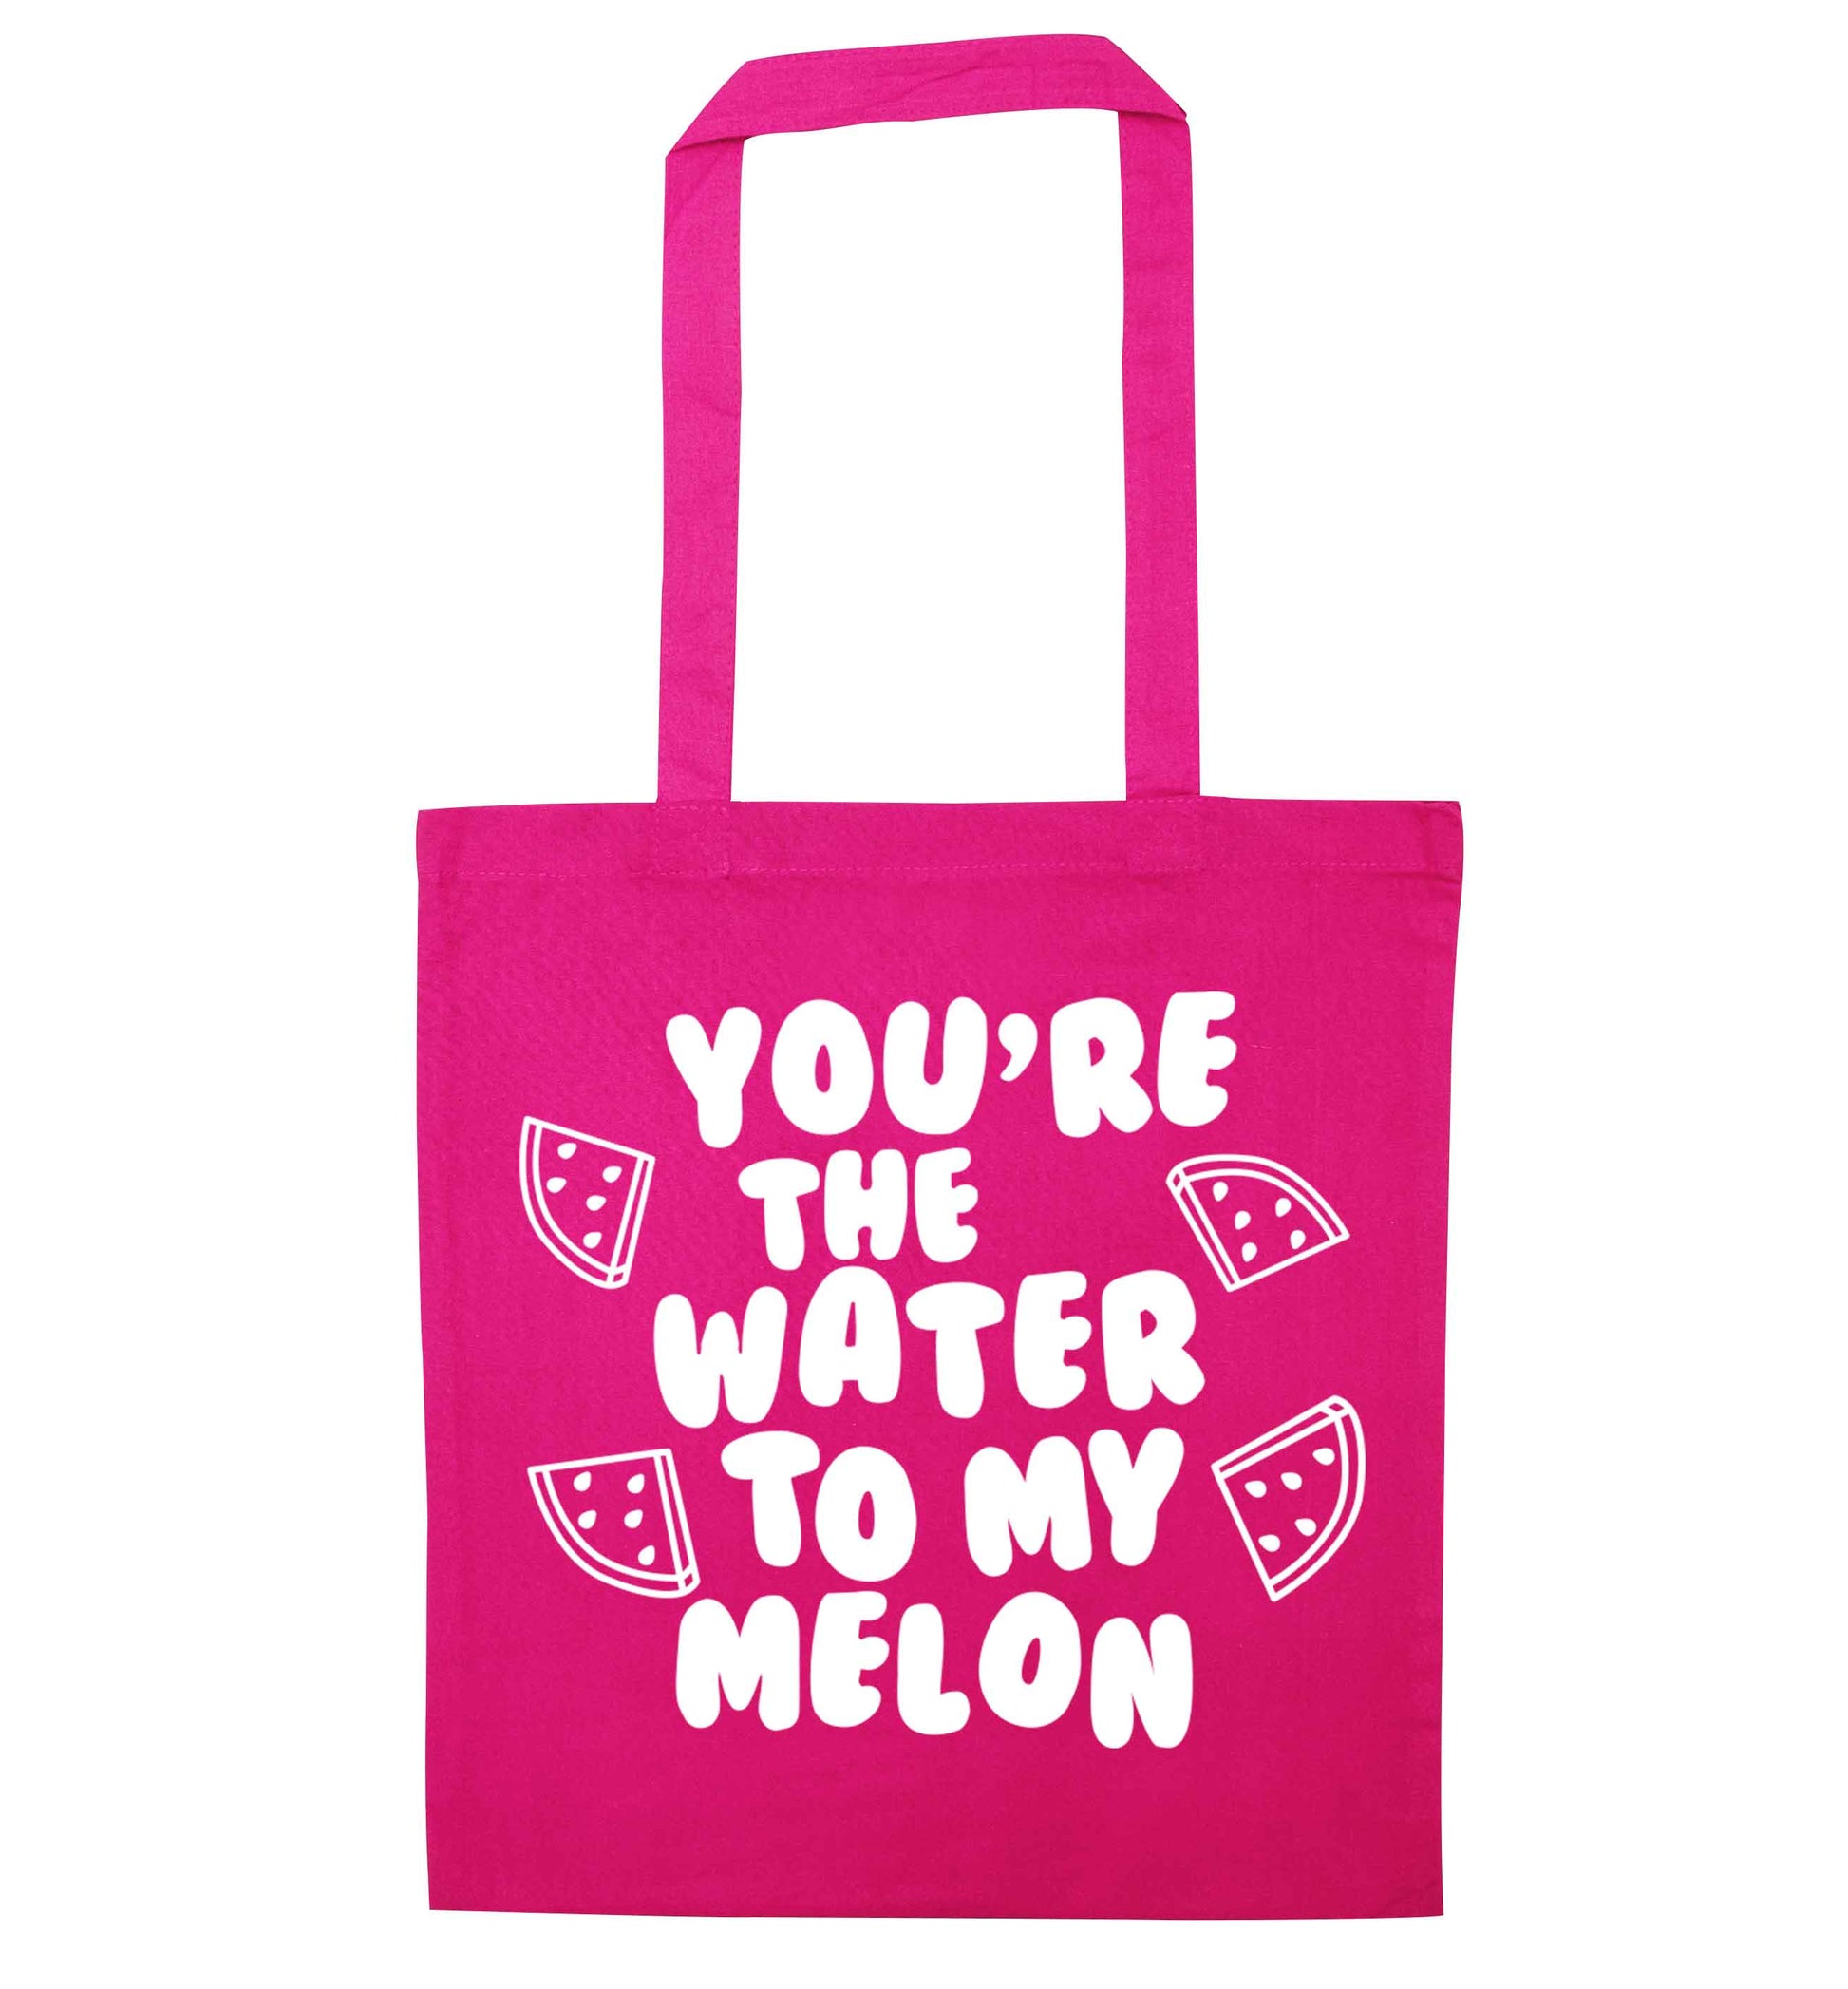 You're the water to my melon pink tote bag